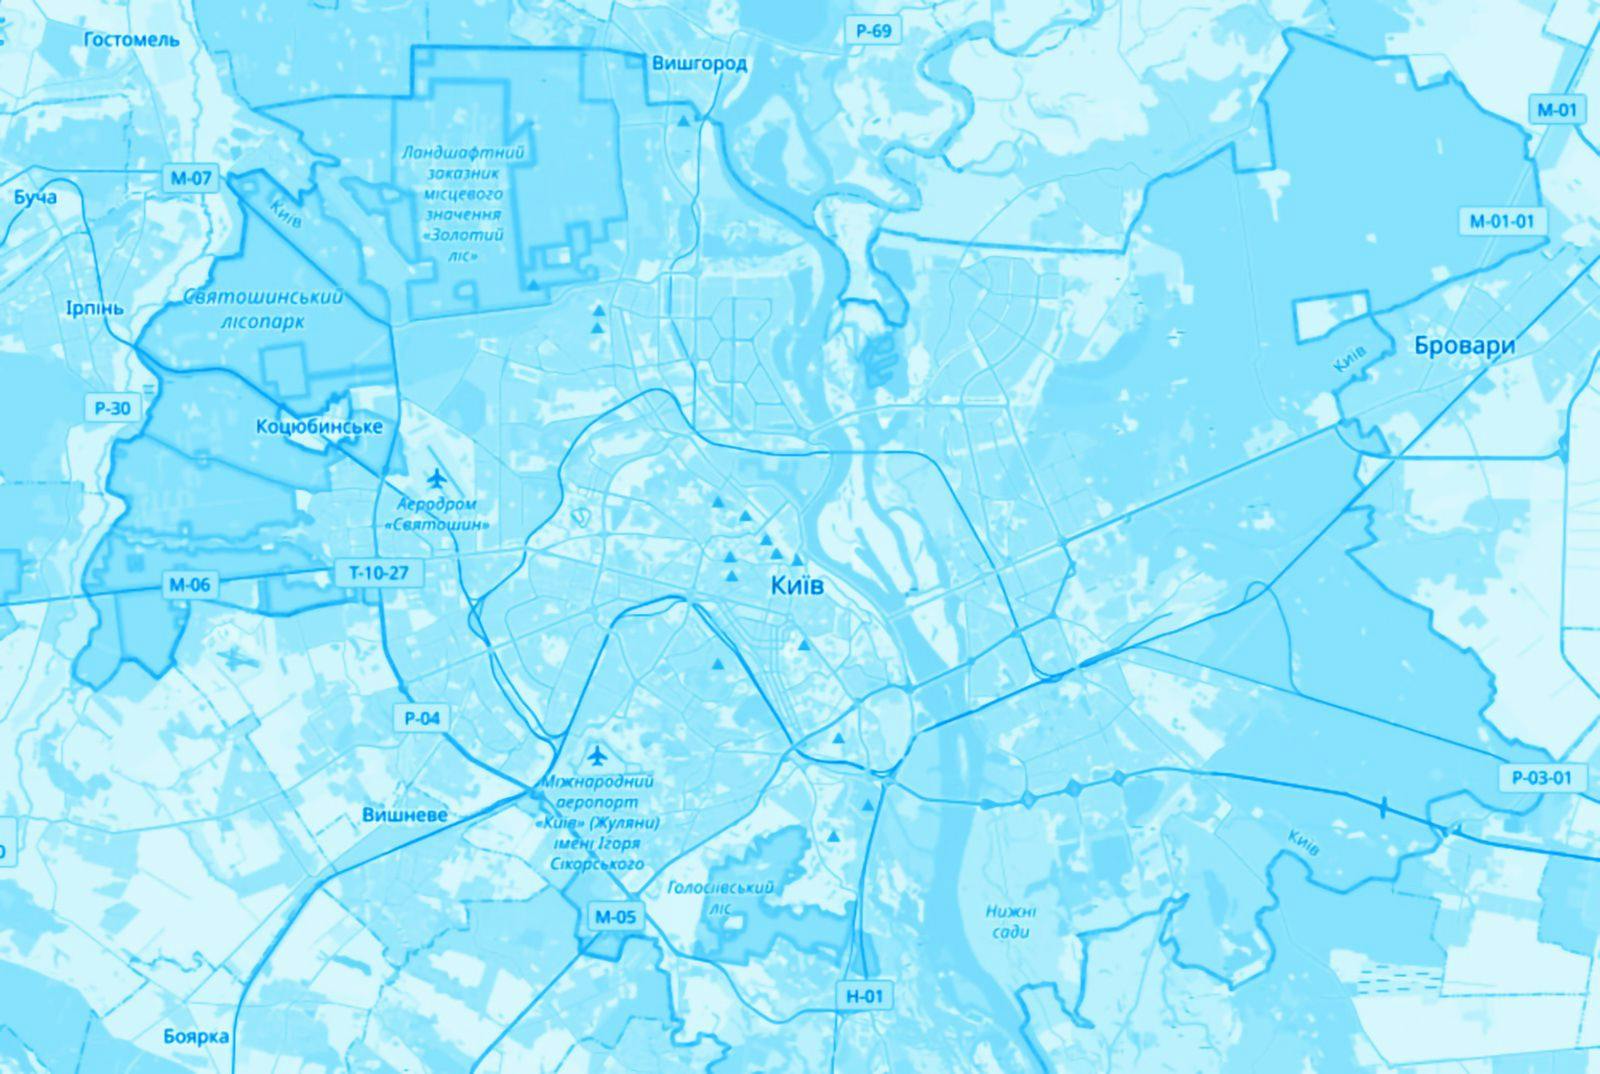 Blue-tinted map (based on an OSM screenshot) shows Kyiv, the capital and most populous city of Ukraine.